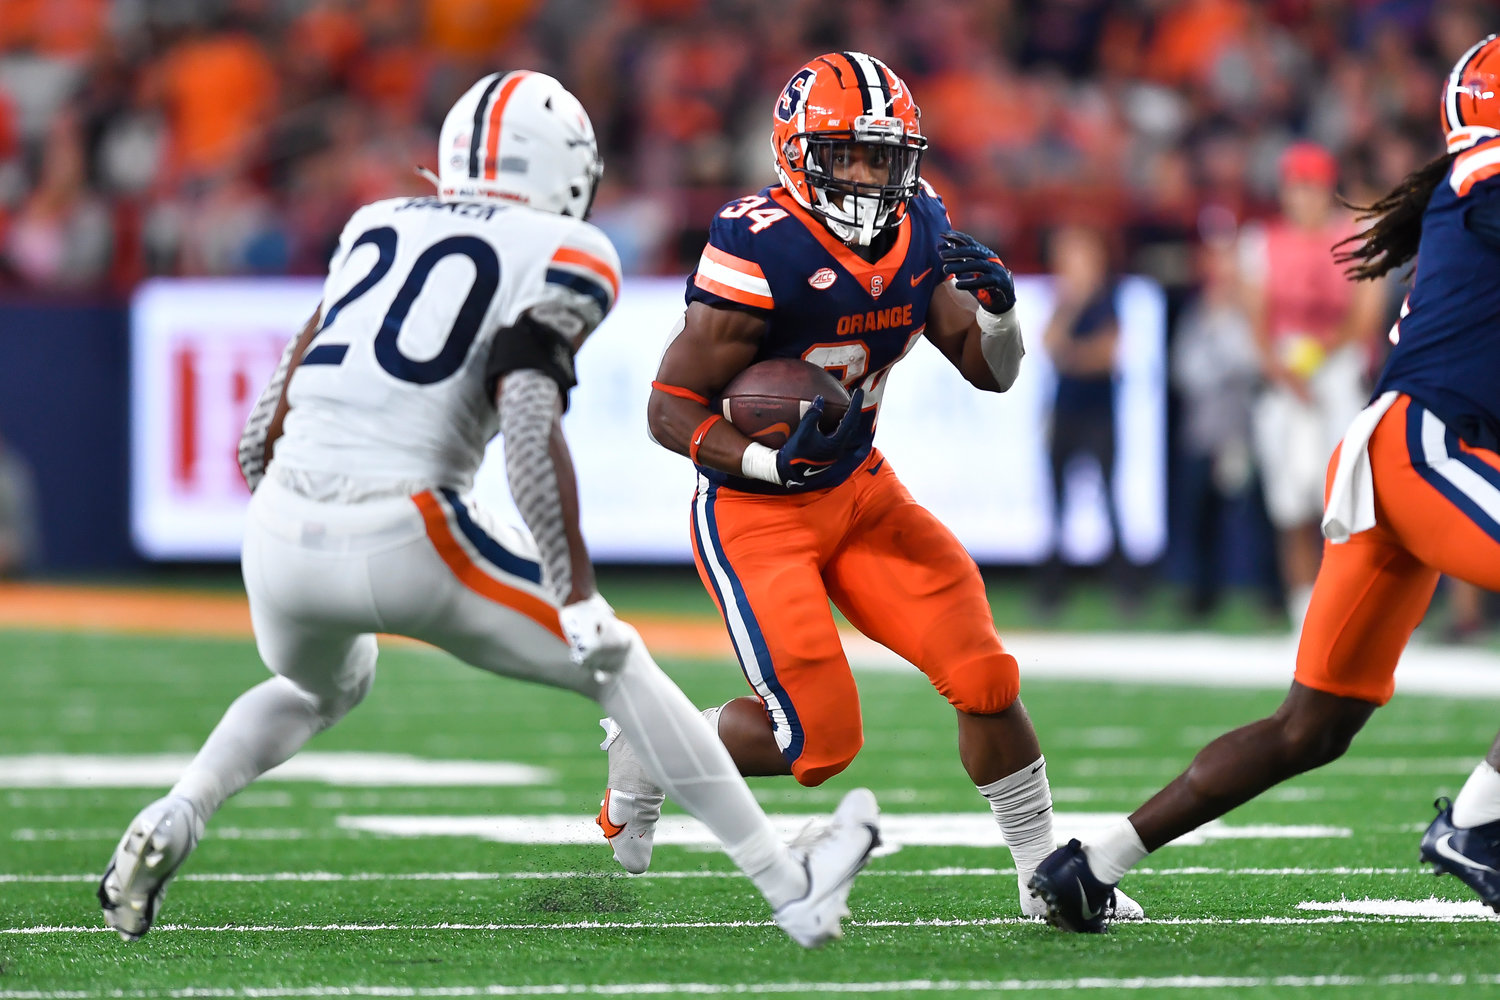 Syracuse running back Sean Tucker (34) runs with the ball while pressured by Virginia safety Jonas Sanker (20) during the first half on Friday night in Syracuse.